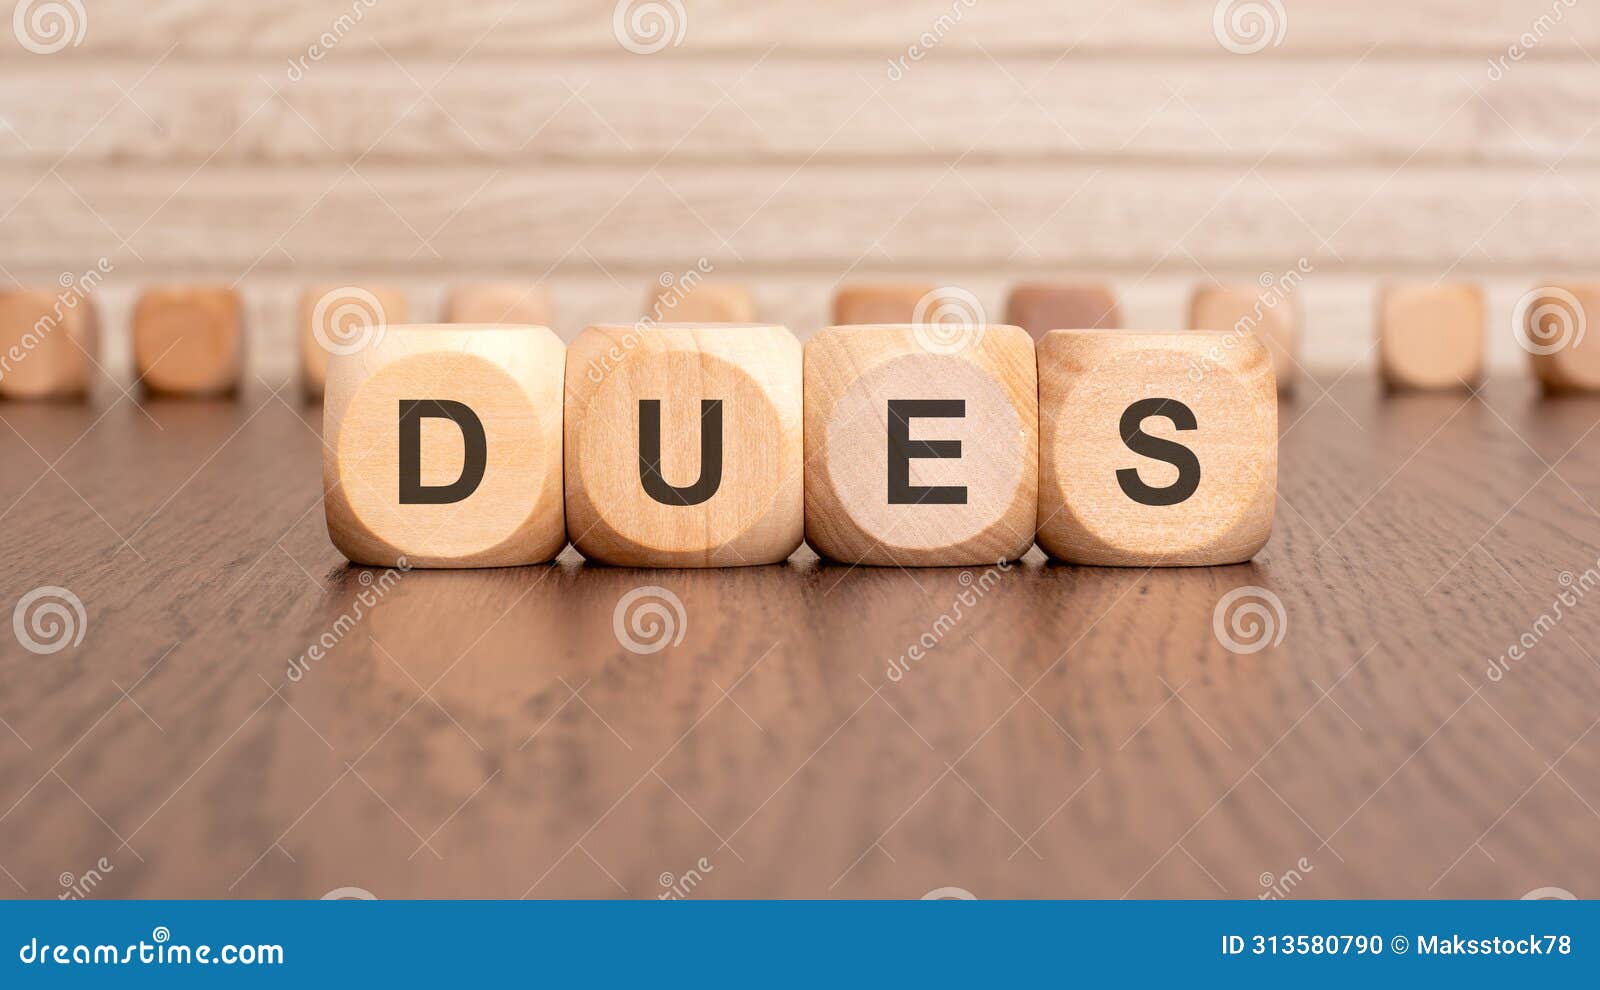 the text dues is written on wooden cubes on a brown background